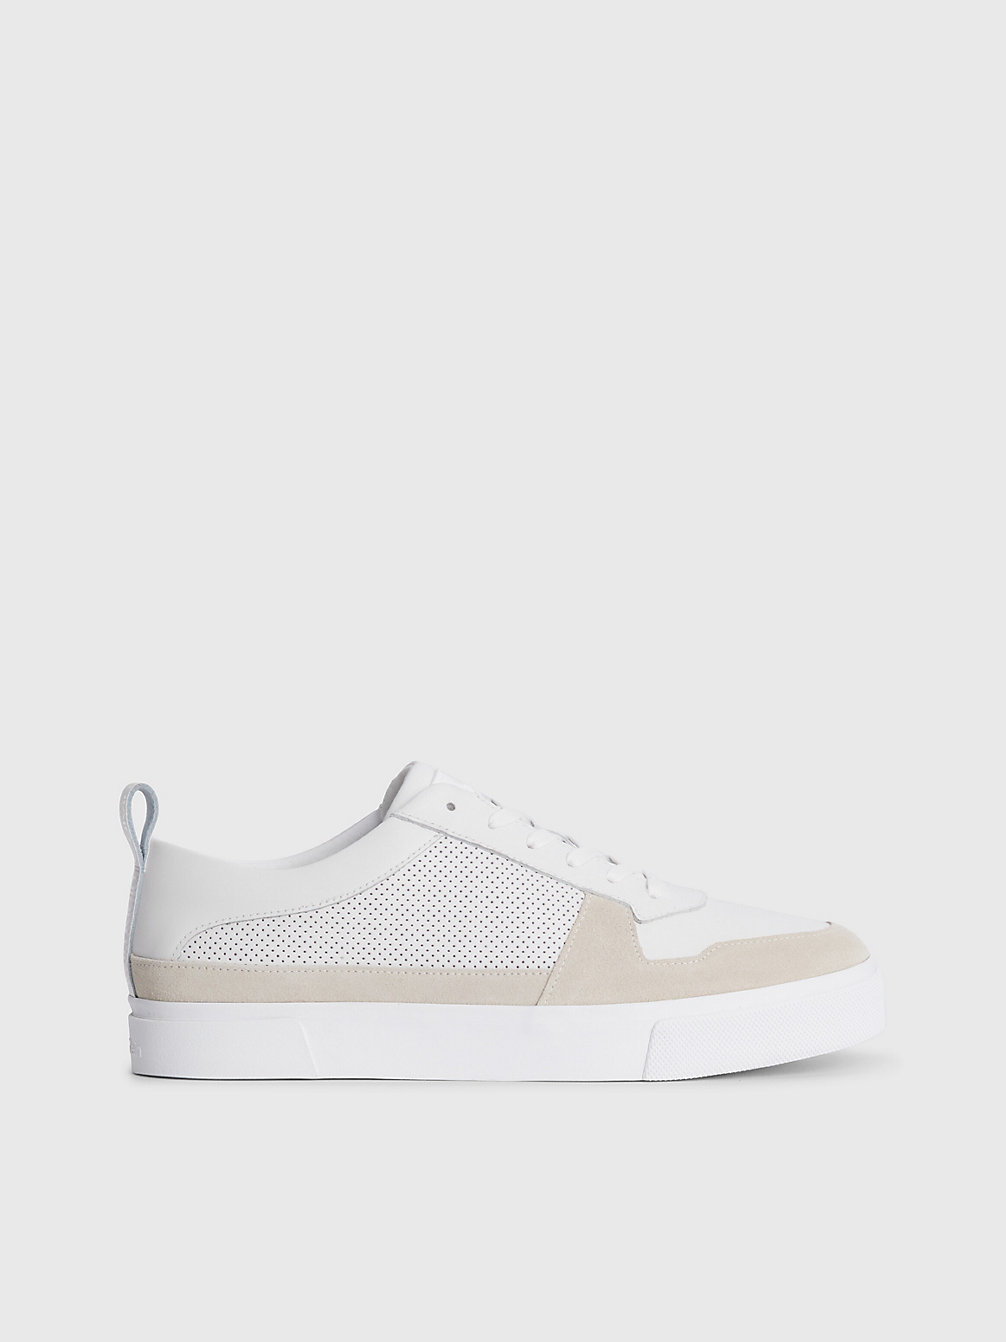 WHITE MIX Leather Trainers undefined men Calvin Klein